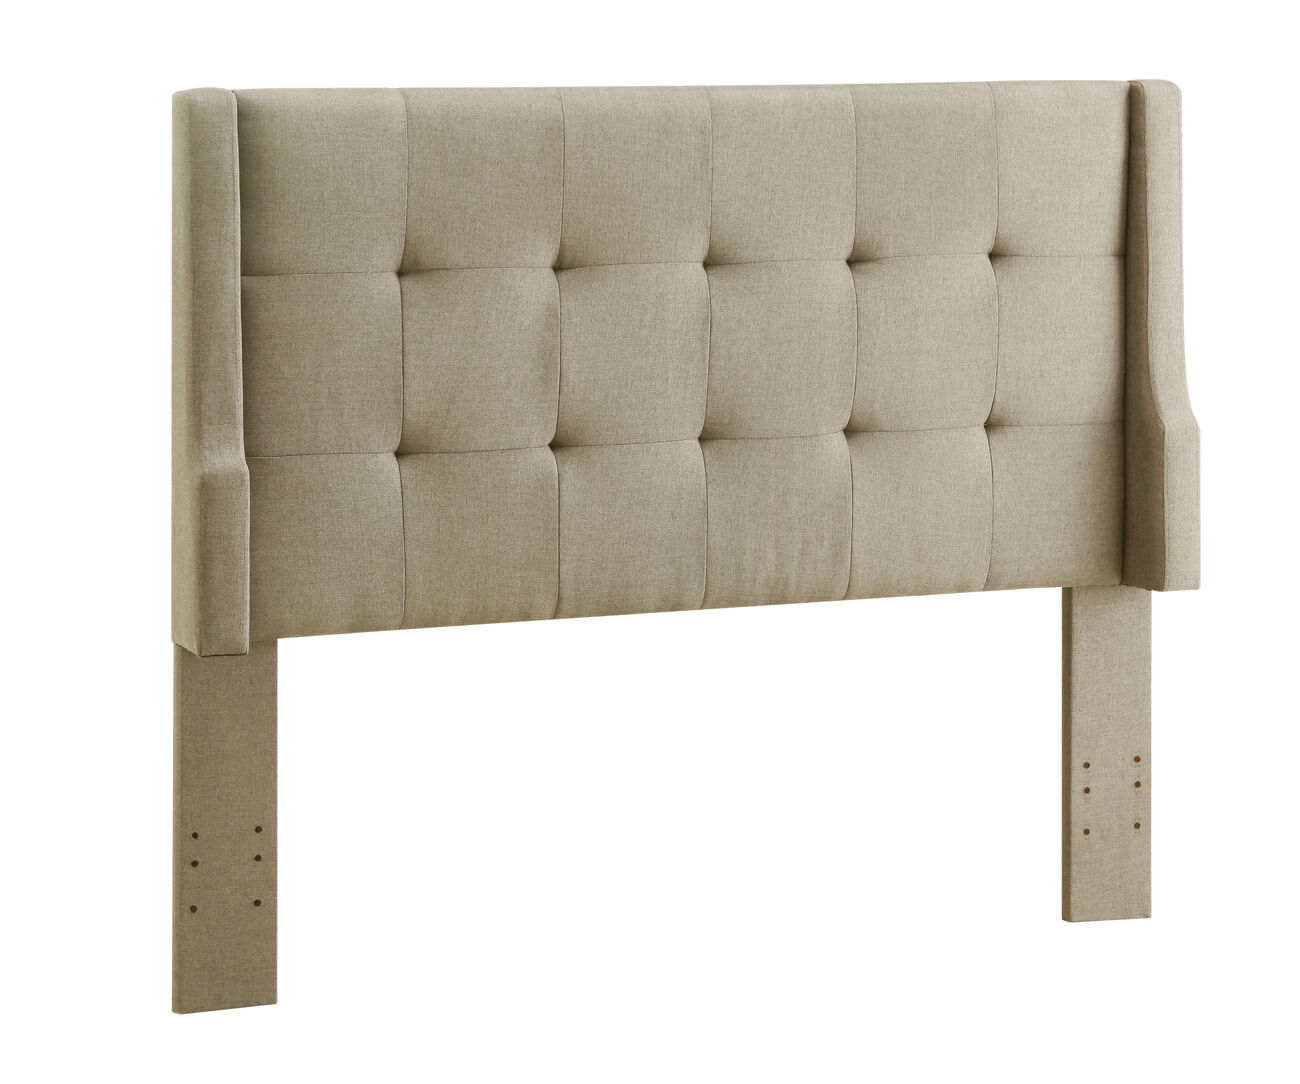 Wood and Fabric Full Queen Size Headboard with Wingback Design, Beige